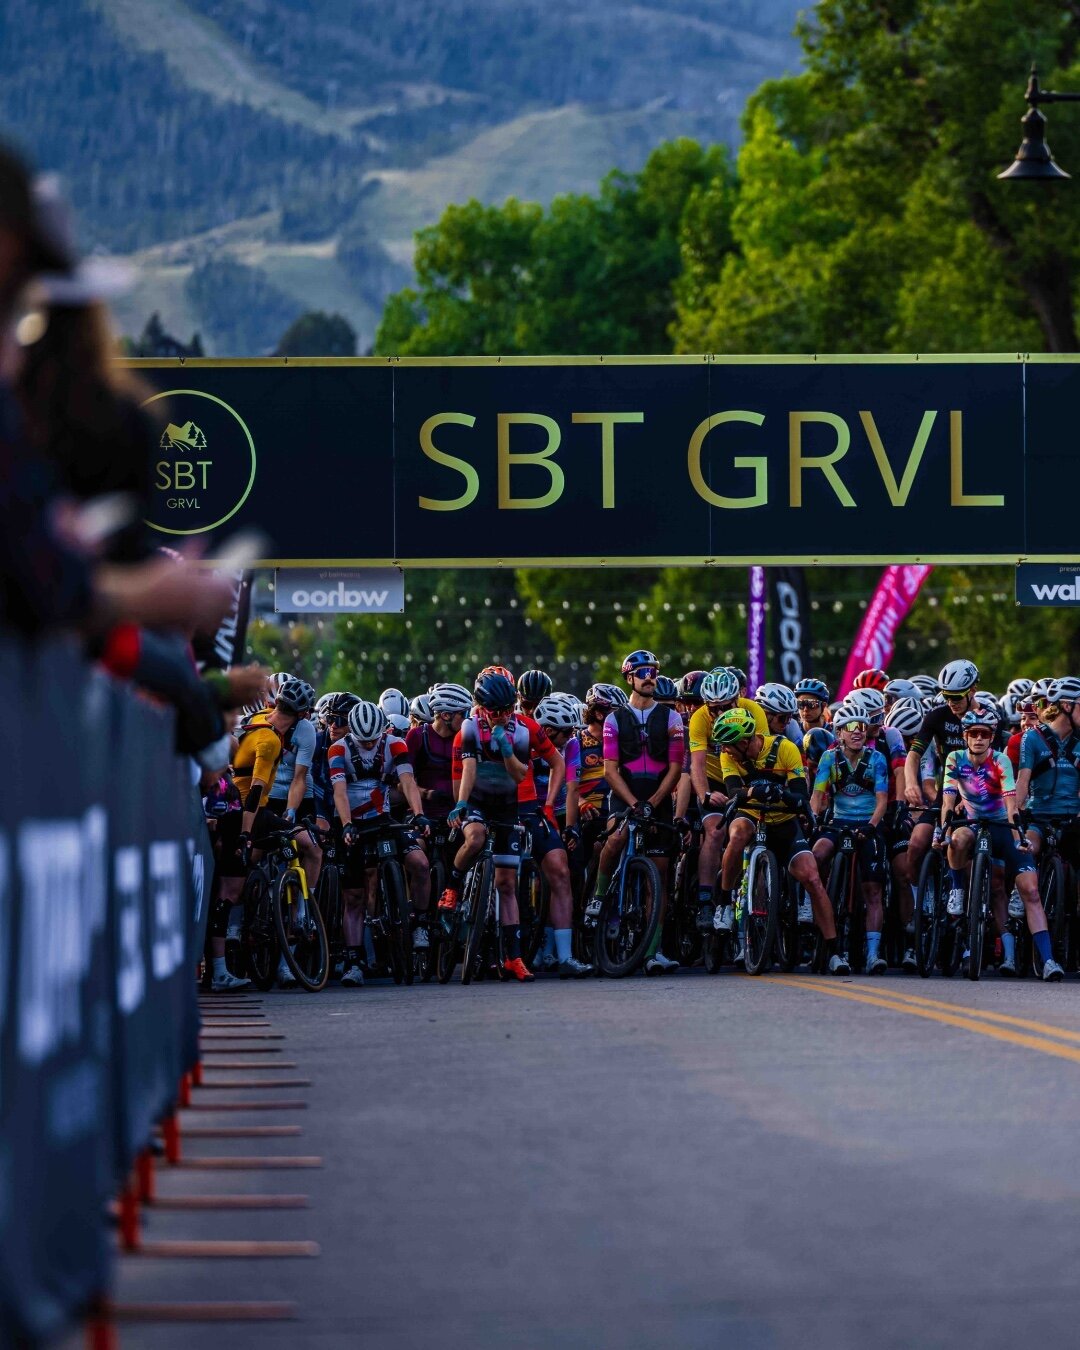 How it started 👉 how it ended 💍. Congrats, @banana_fontan. You rode the Black Course but may have won the weekend. 

Anyone else celebrate a special moment at SBT GRVL?

#sbtgrvl #grvlengagement #bikewedding